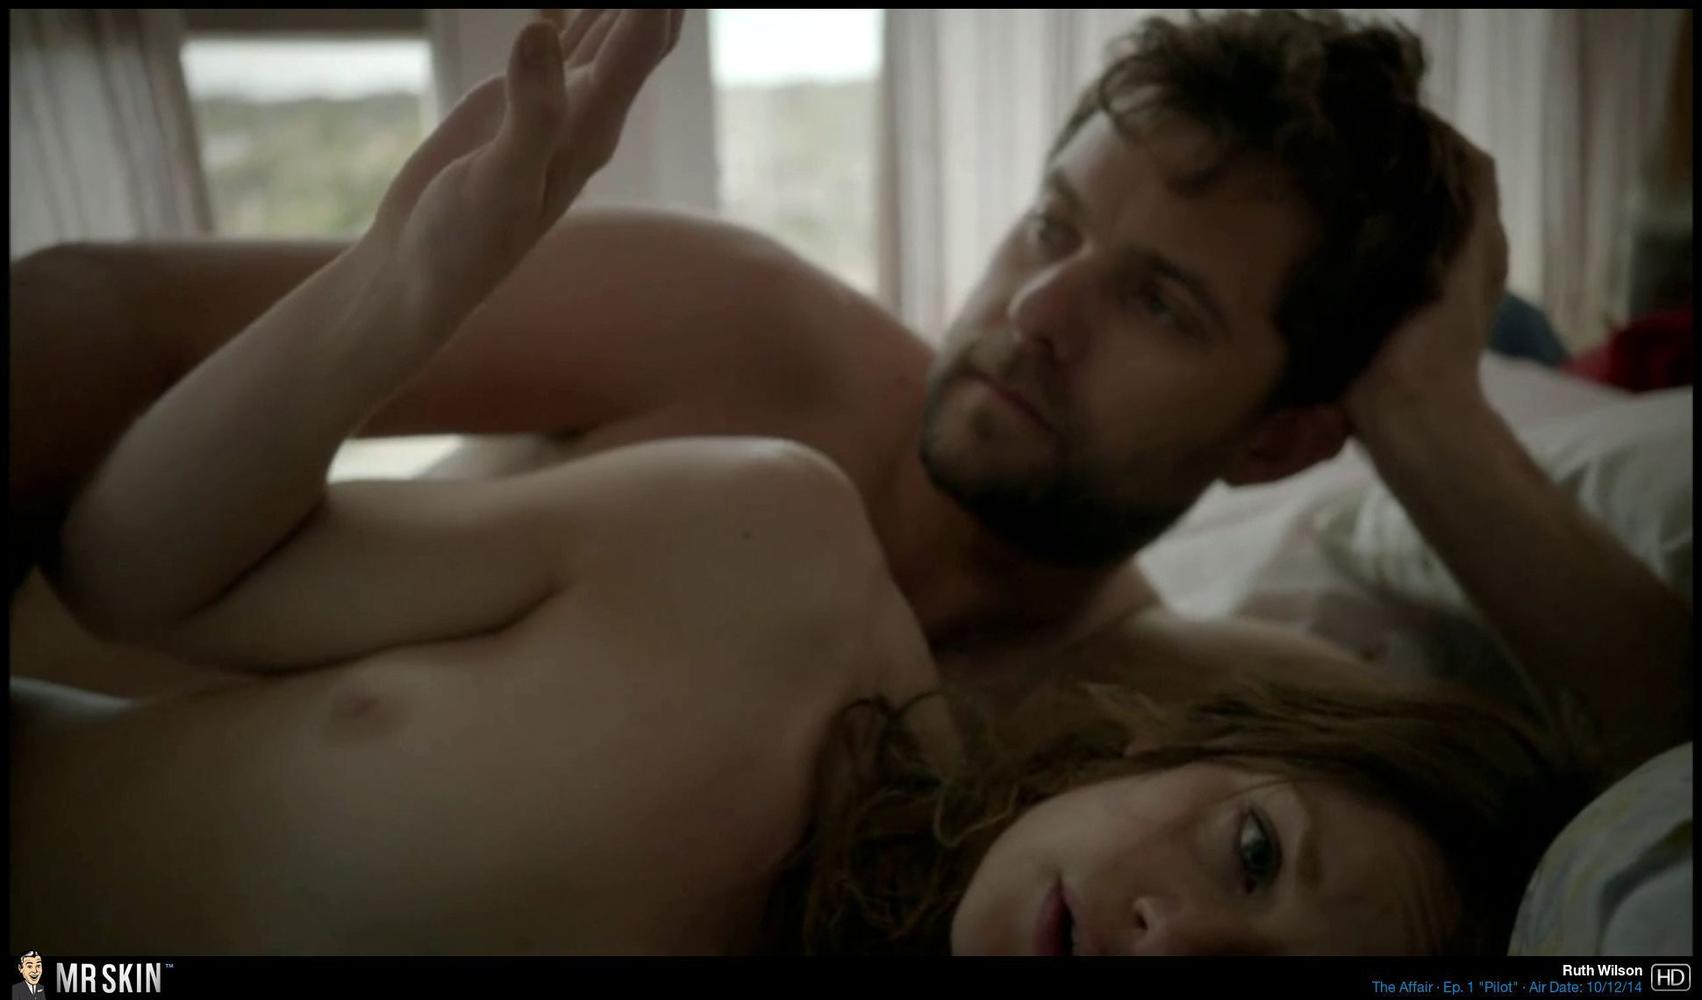 TV Nudity Report: Boardwalk Empire, The Knick, and the Early Premiere